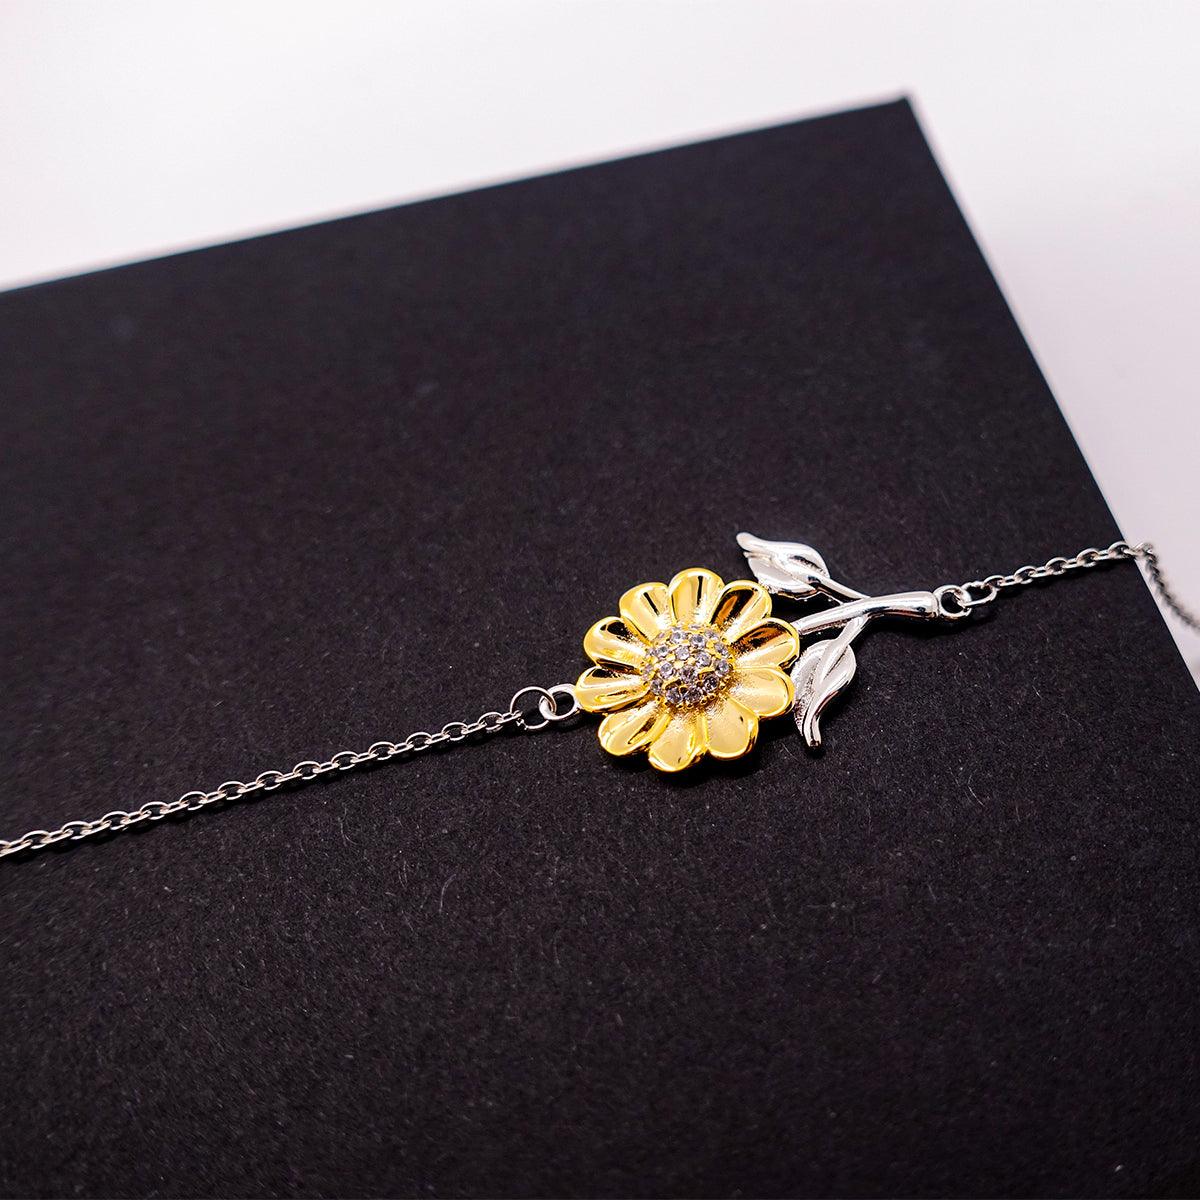 Sunflower Bracelet for Godson Present, Godson Always follow your dreams, never forget how amazing you are, Godson Birthday Christmas Gifts Jewelry for Girls Boys Teen Men Women - Mallard Moon Gift Shop